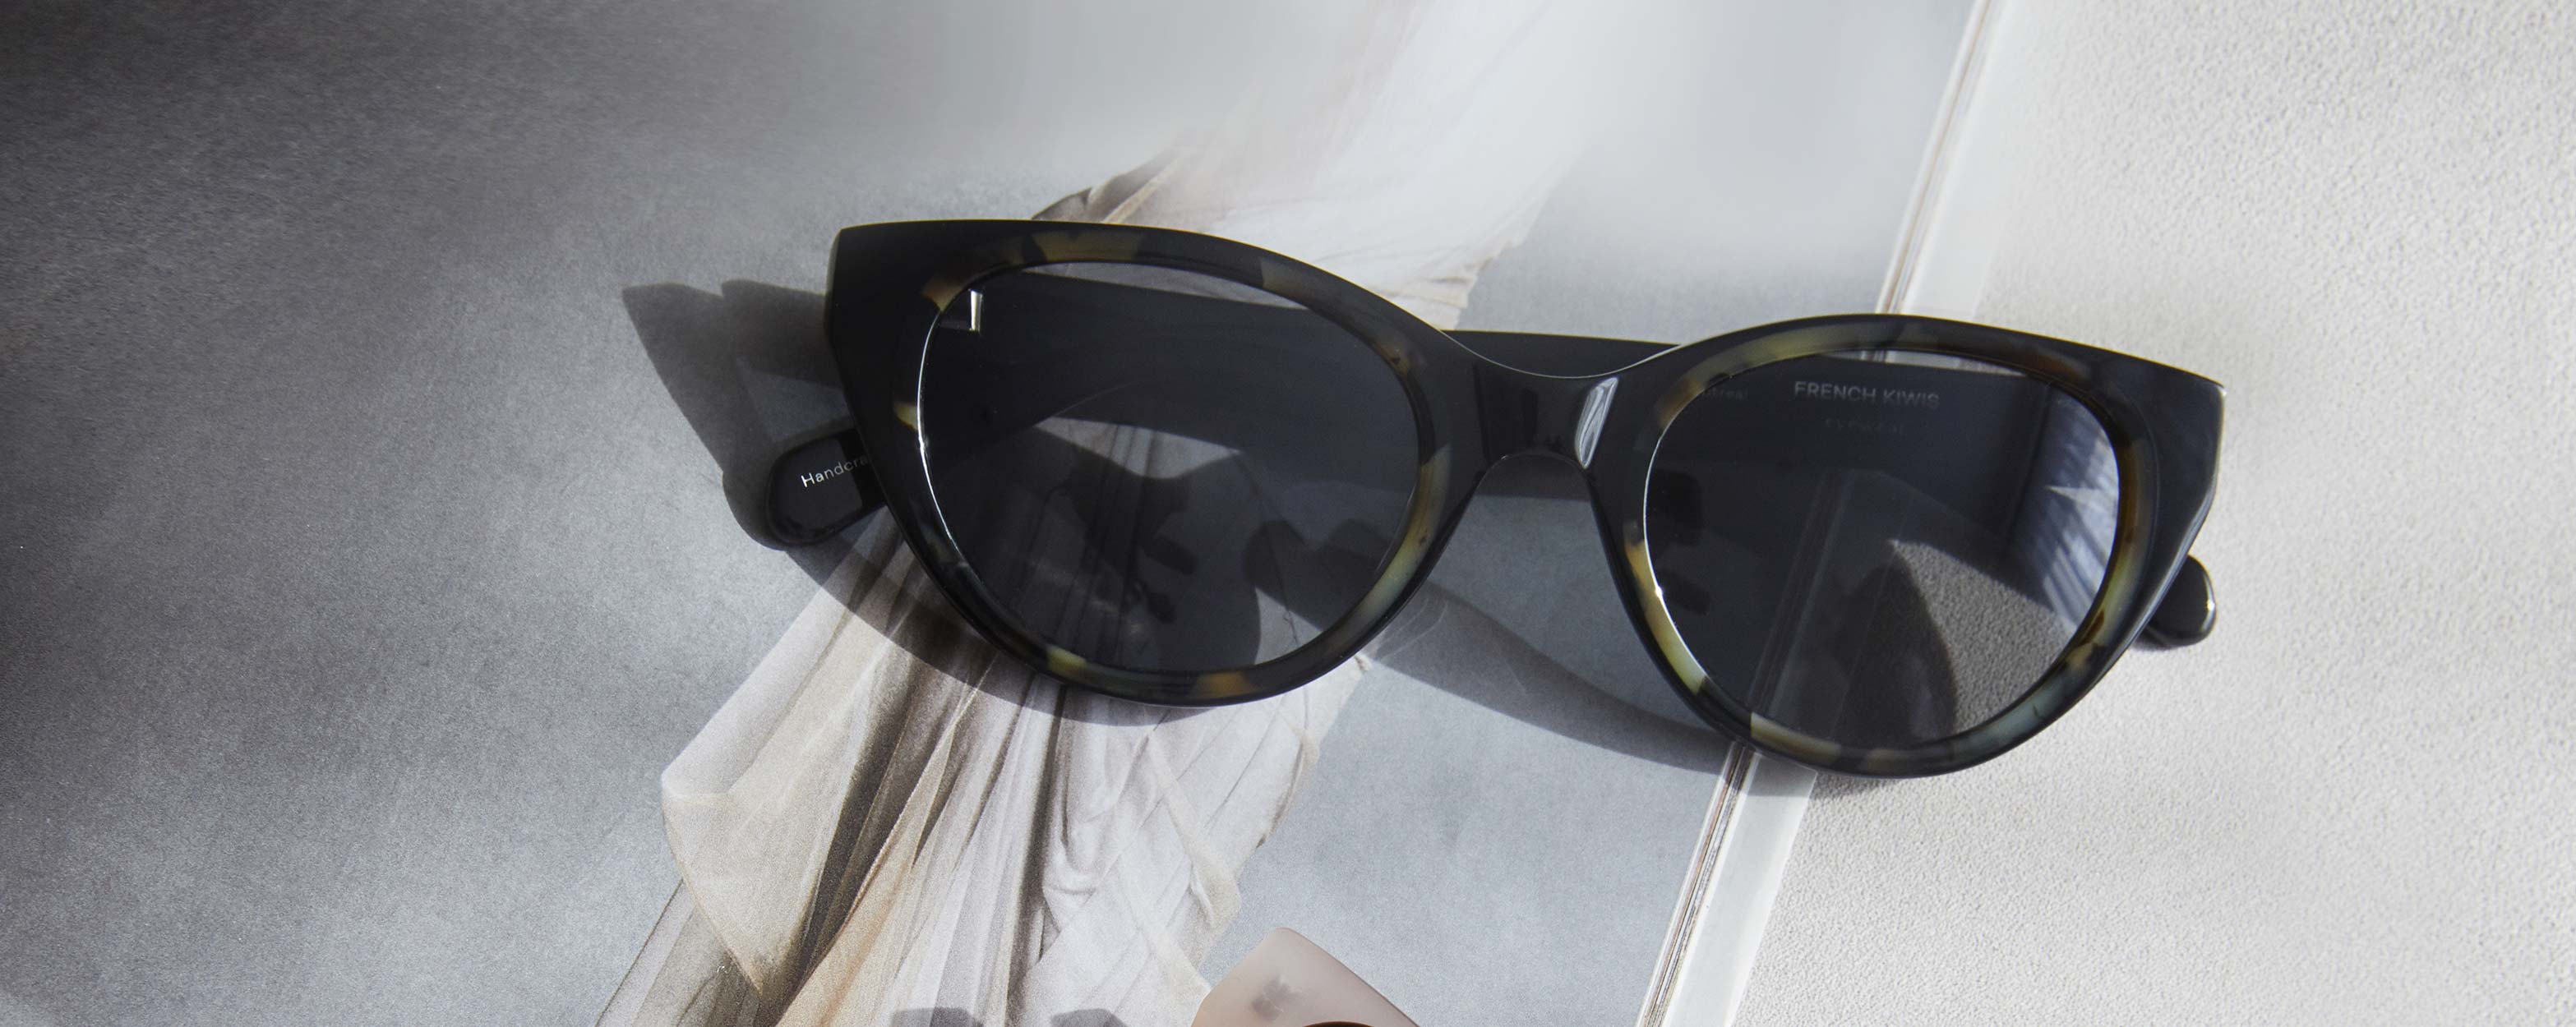 Photo Details of Colette Sun Cherry Sun Glasses in a room